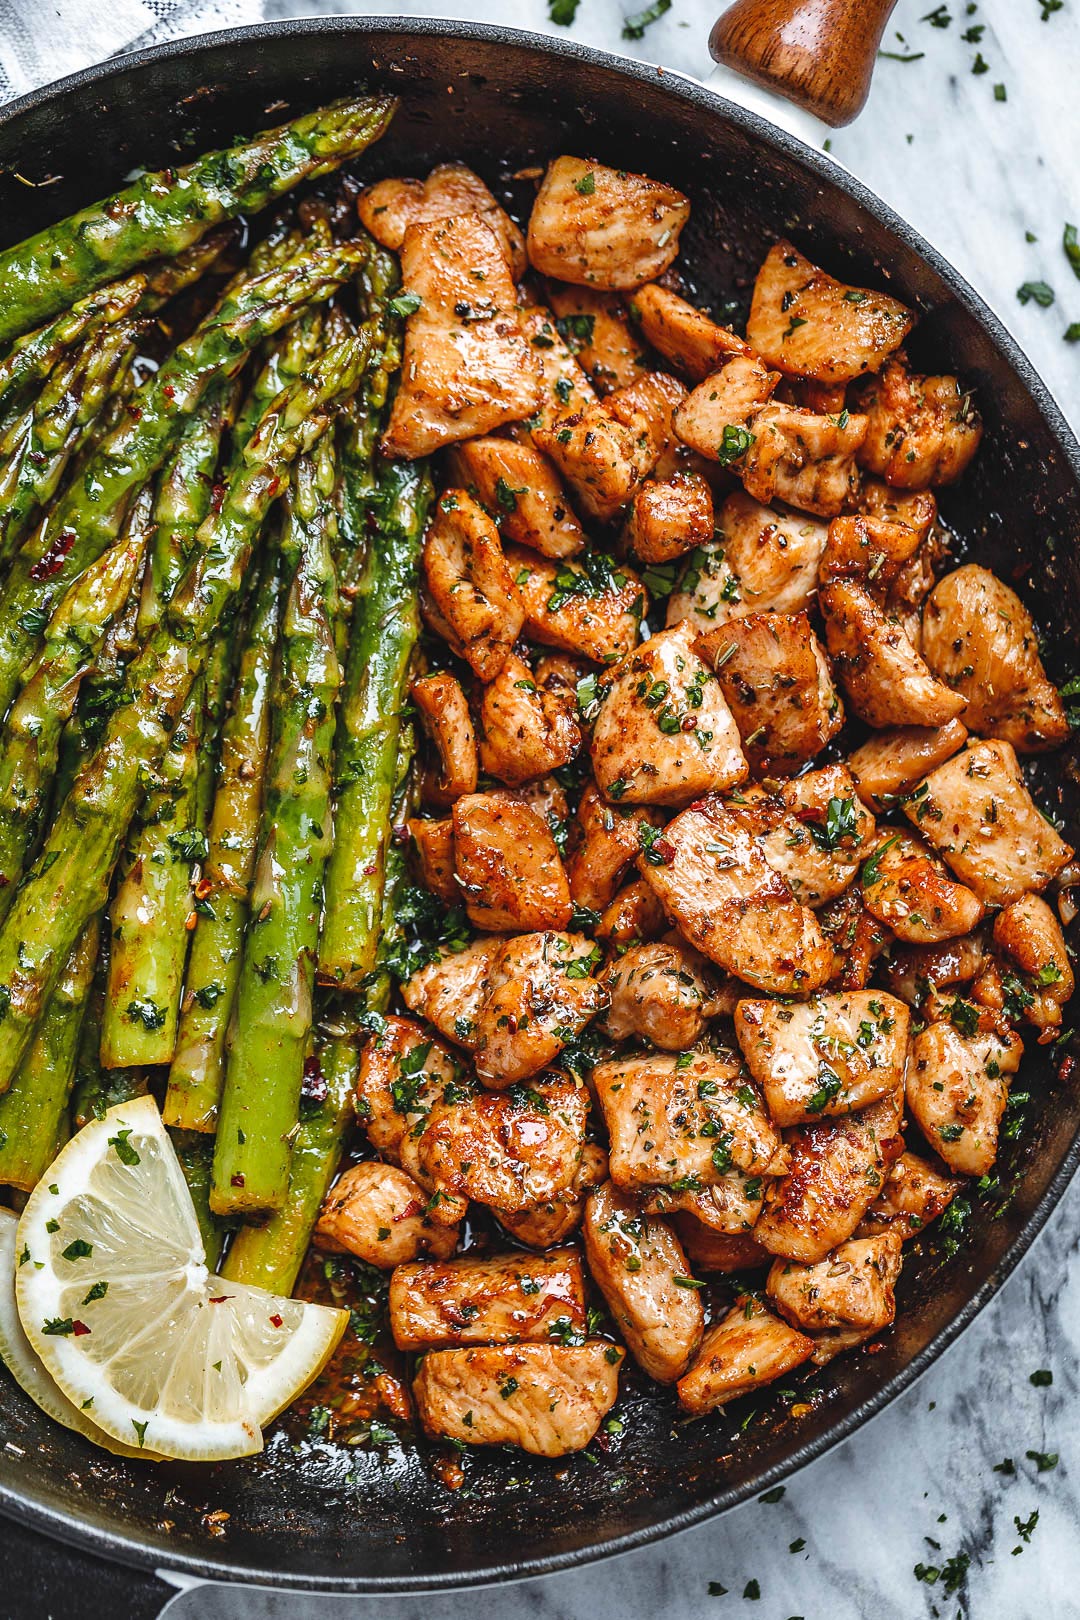 chicken bites and asparagus recipe - #recipe by #eatwell101®